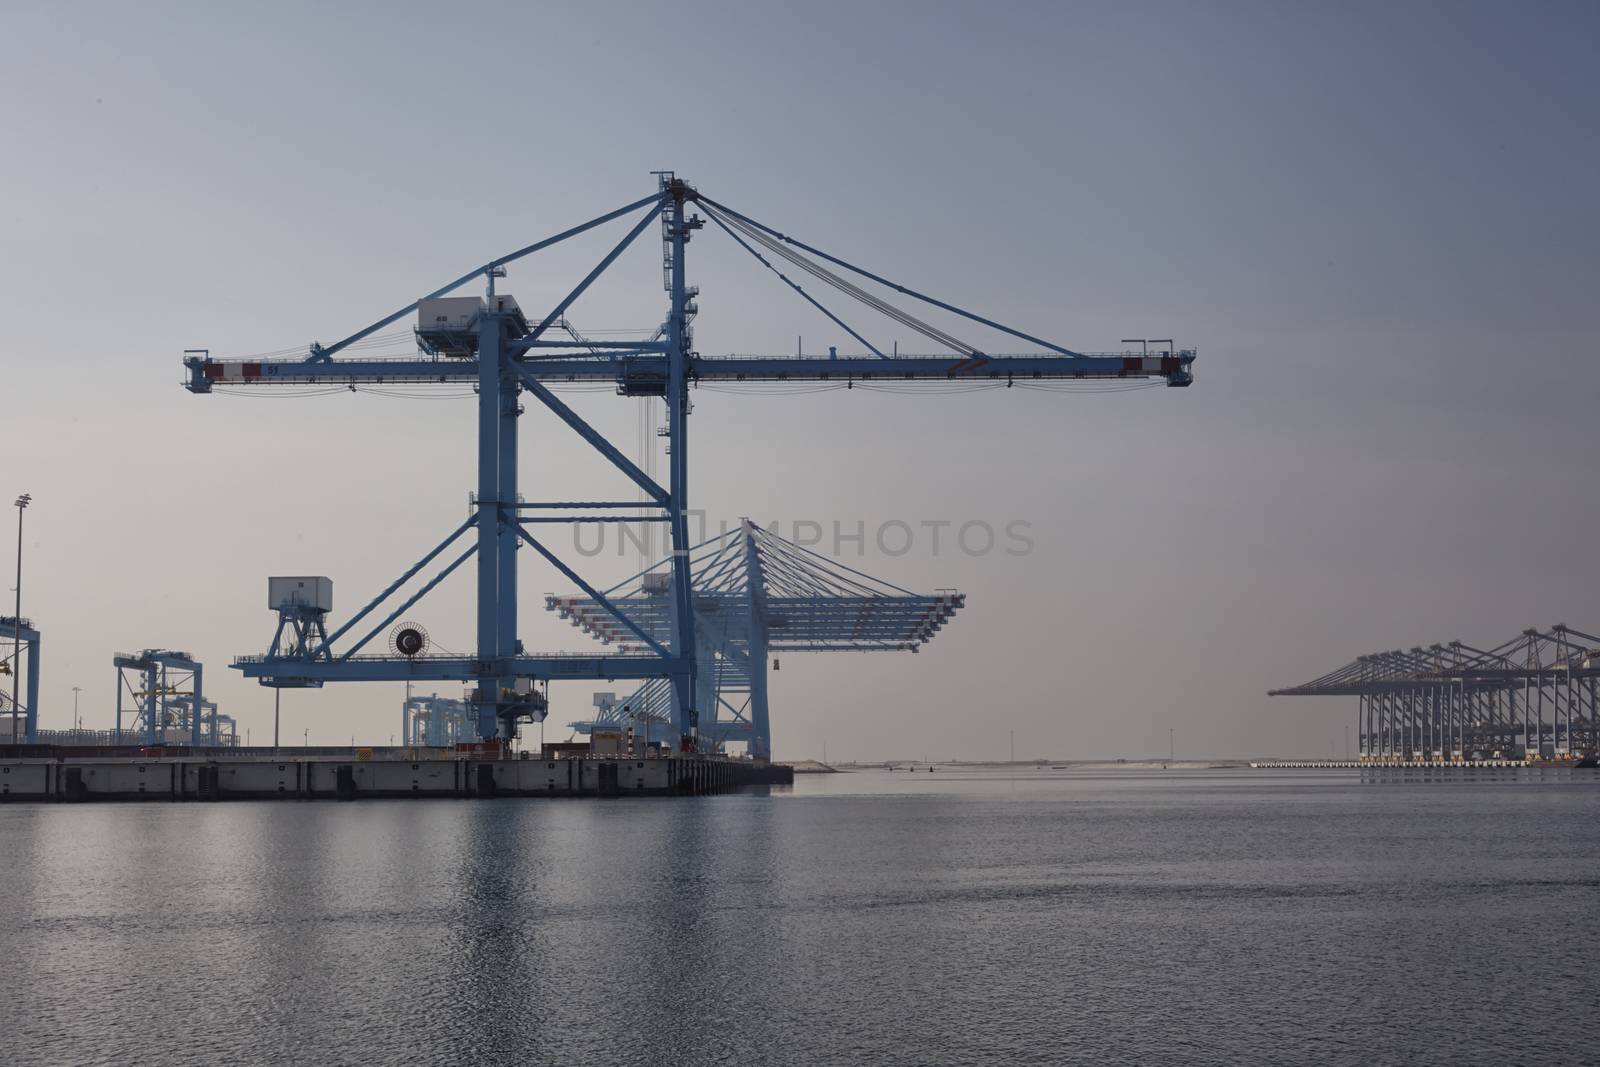 Deserted port terminal in the morning in a harbour for loading and offloading cargo ships and freight with rows of large industrial cranes to lift goods off the decks and from the holds